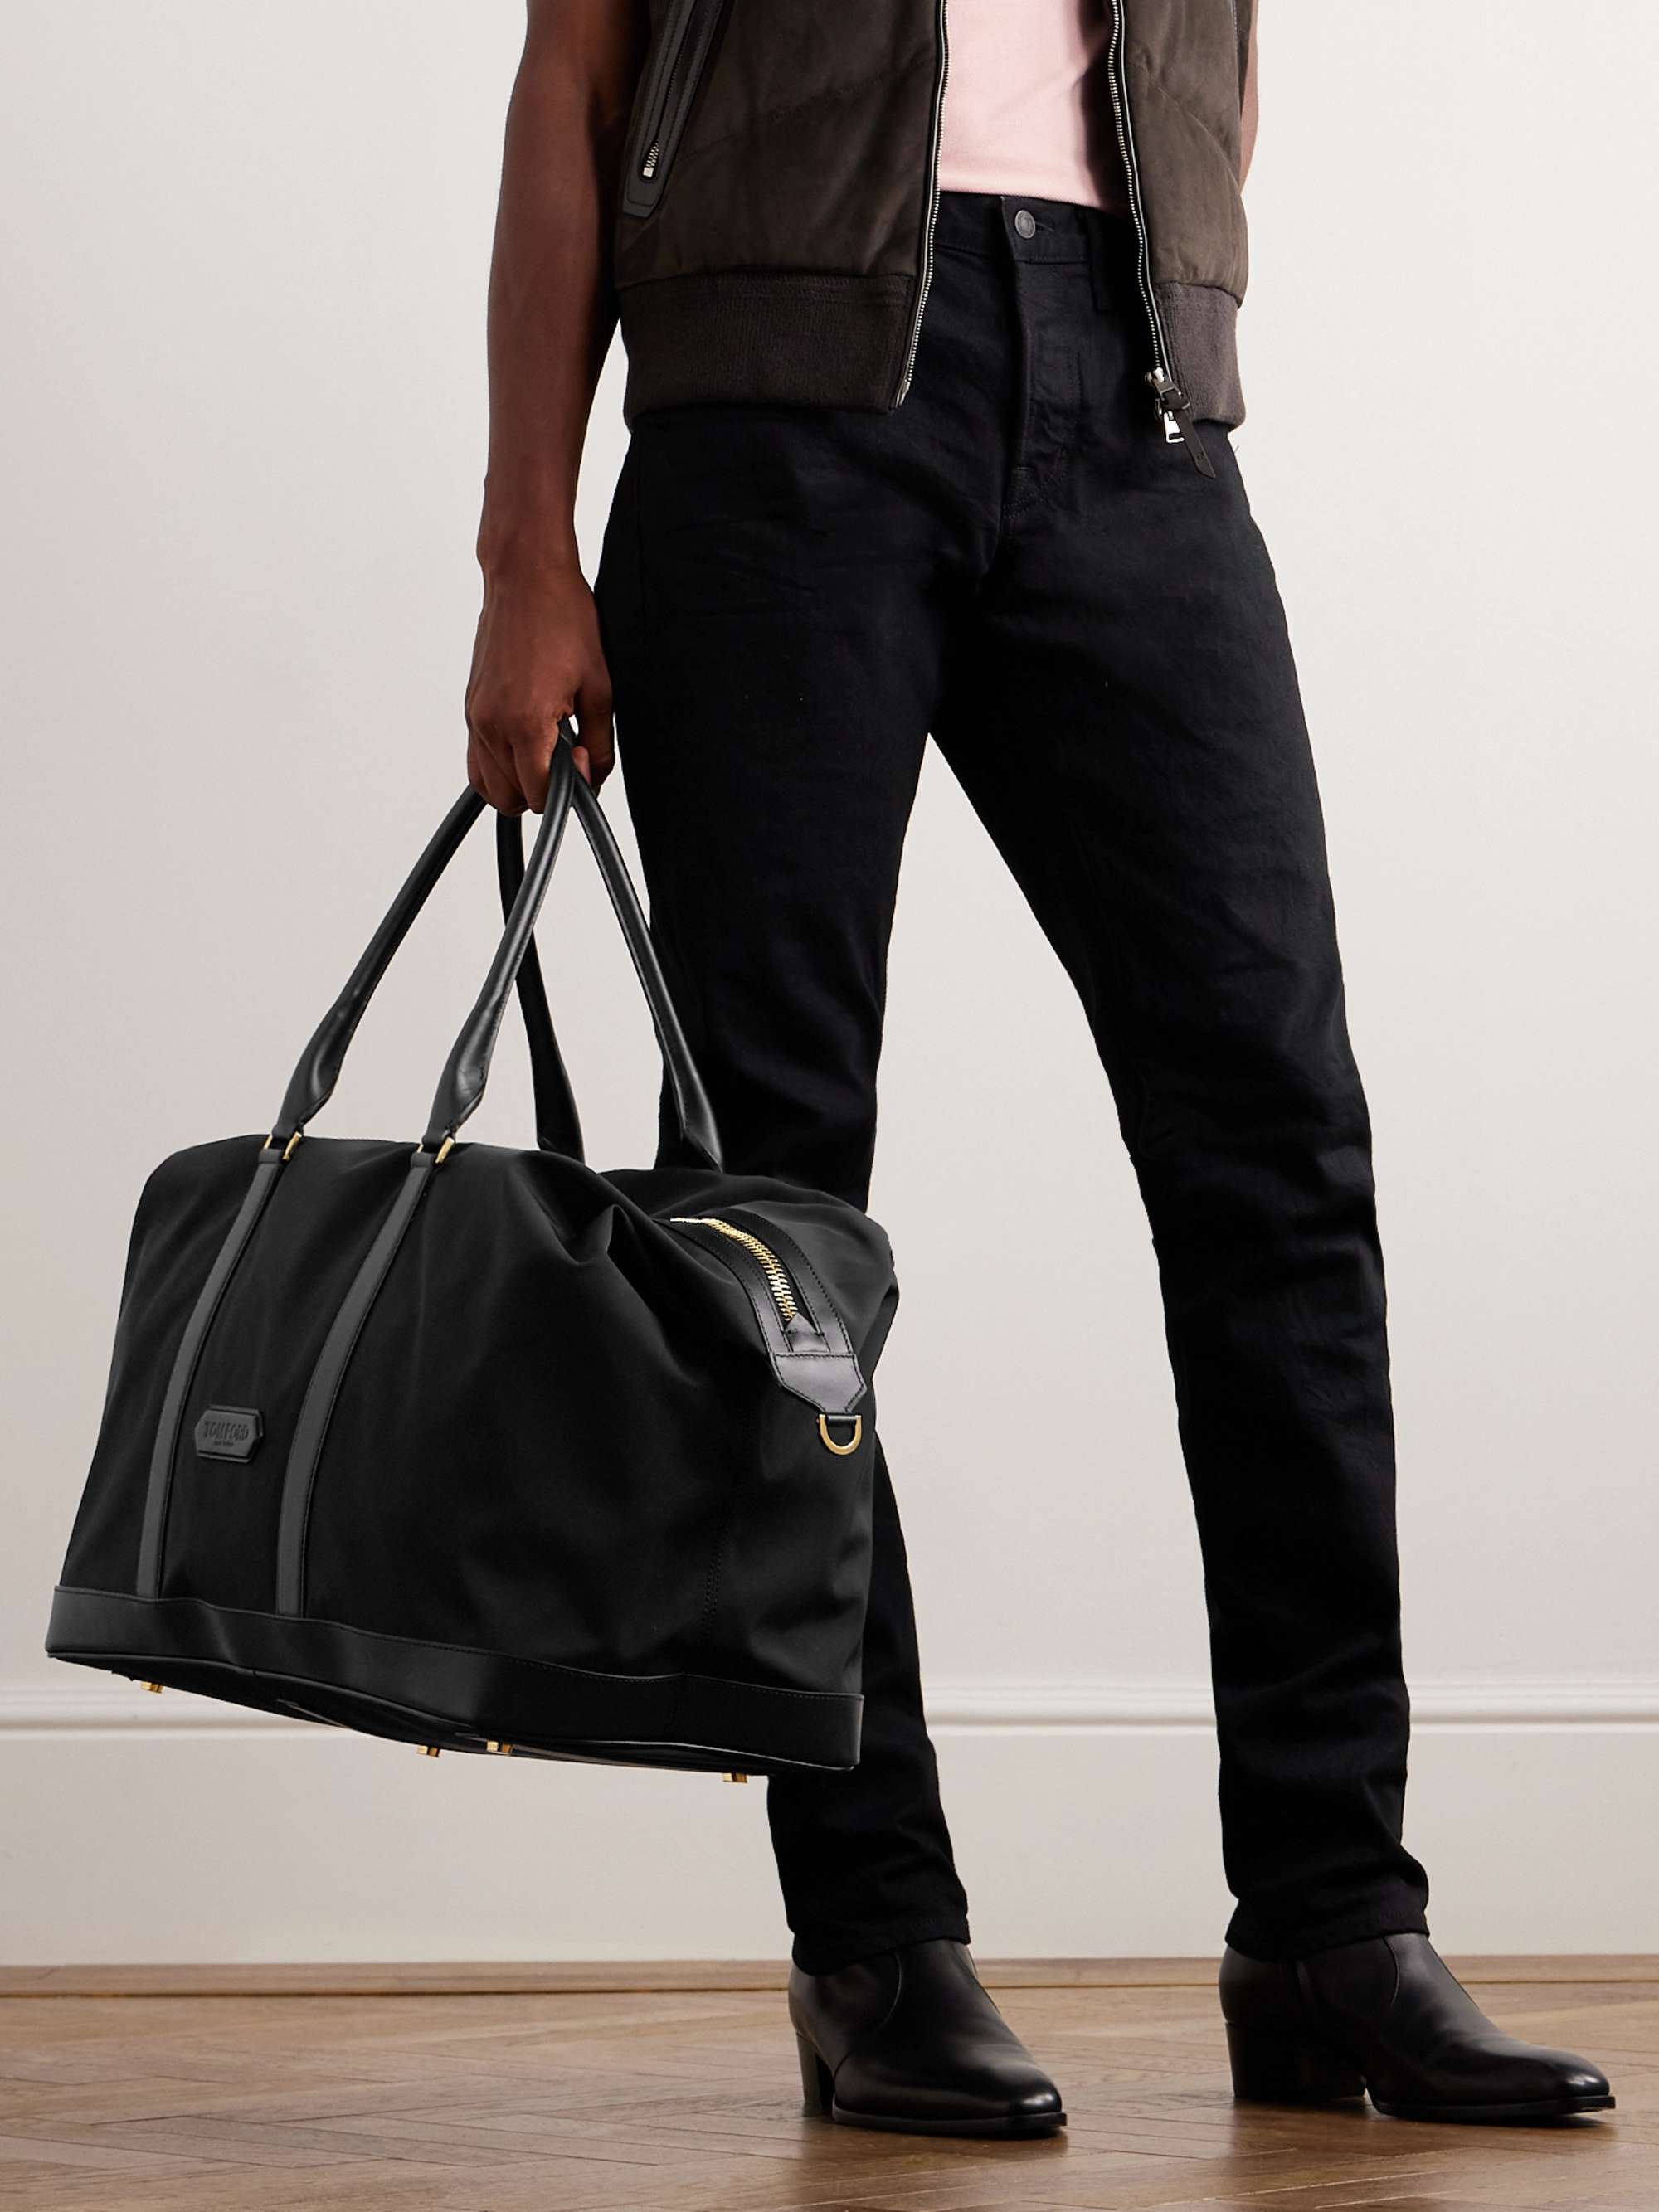 TOM FORD Leather-Trimmed Recycled-Nylon Weekend Bag